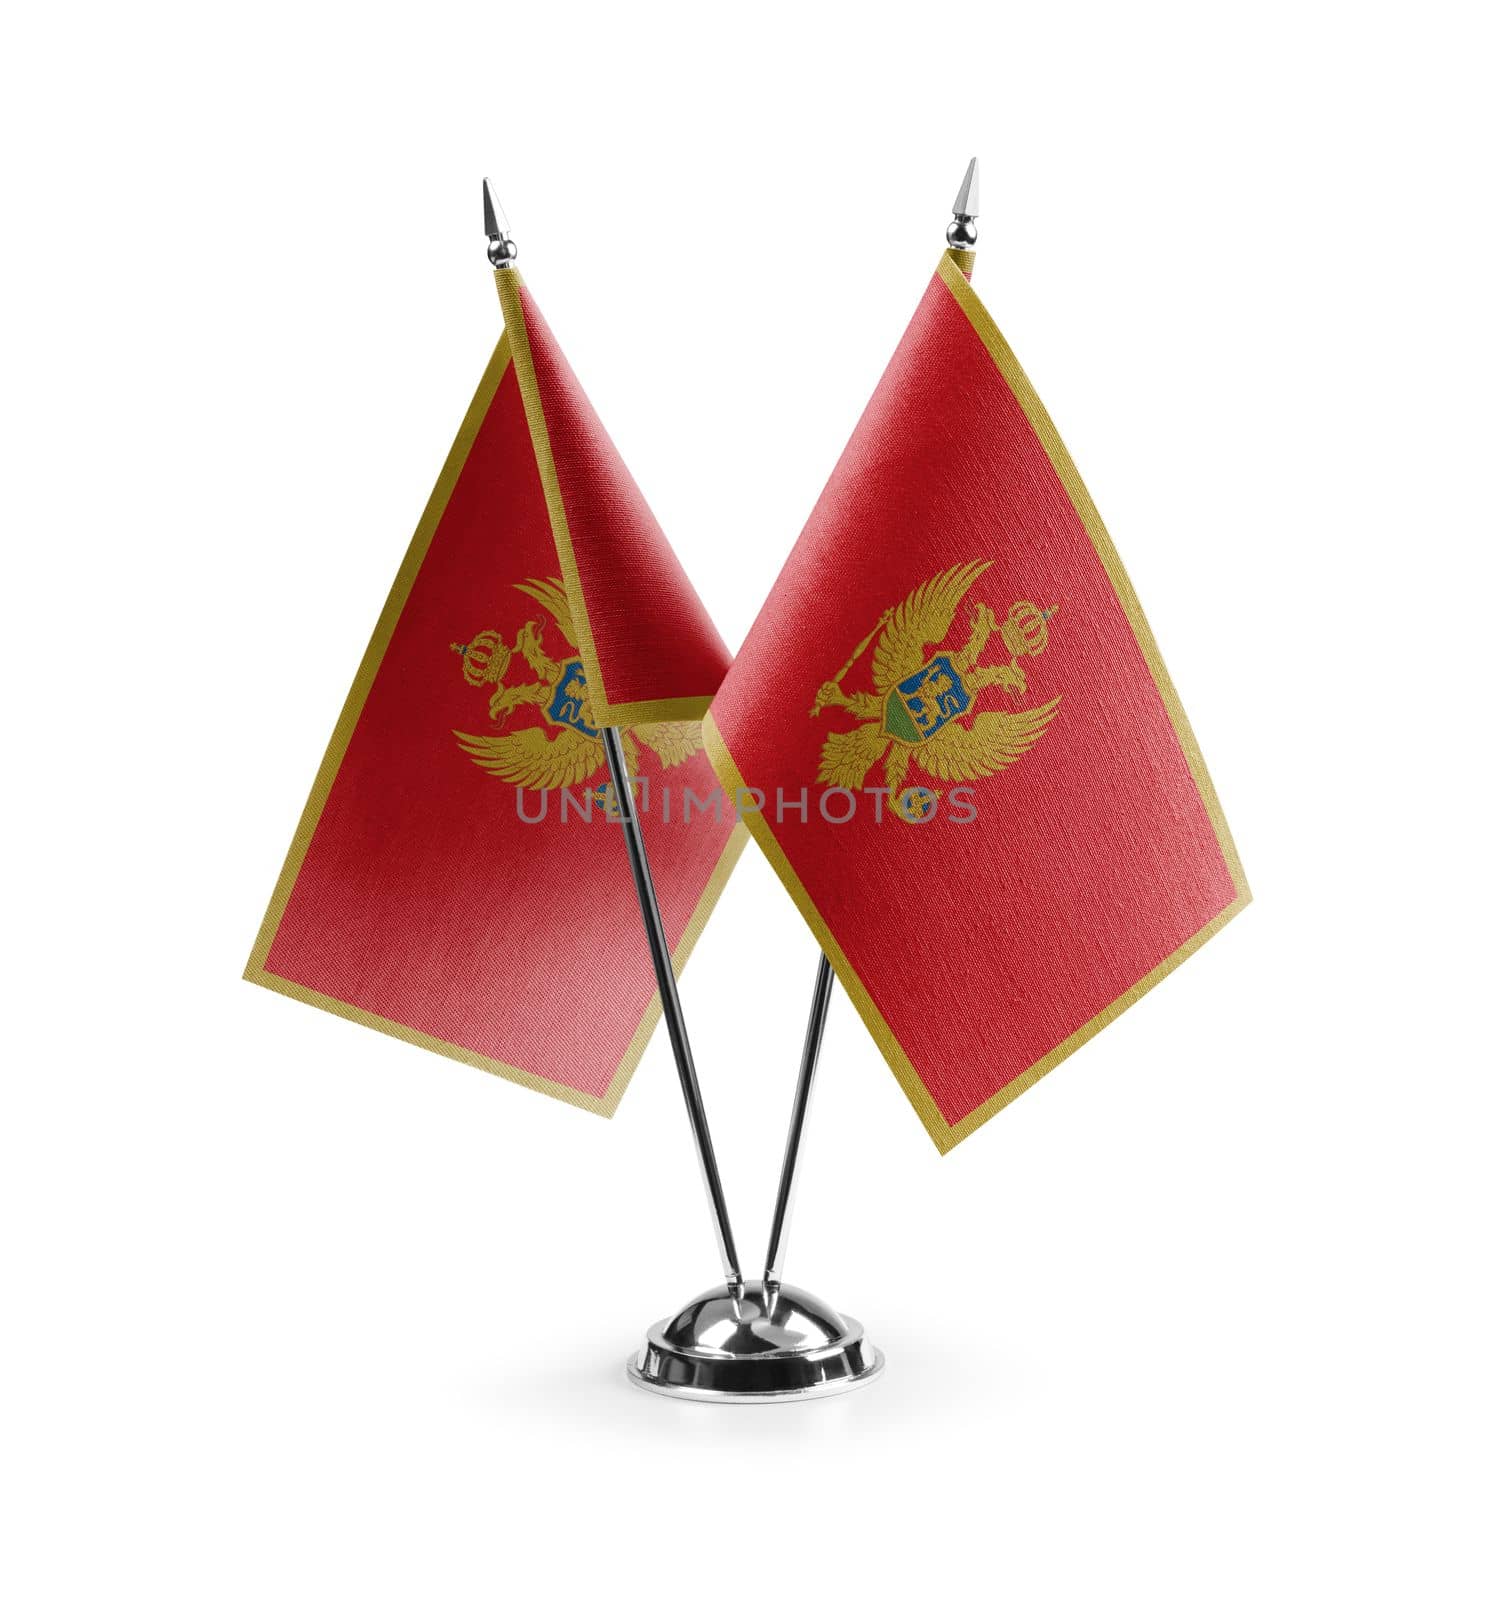 Small national flags of the Montenegro on a white background.